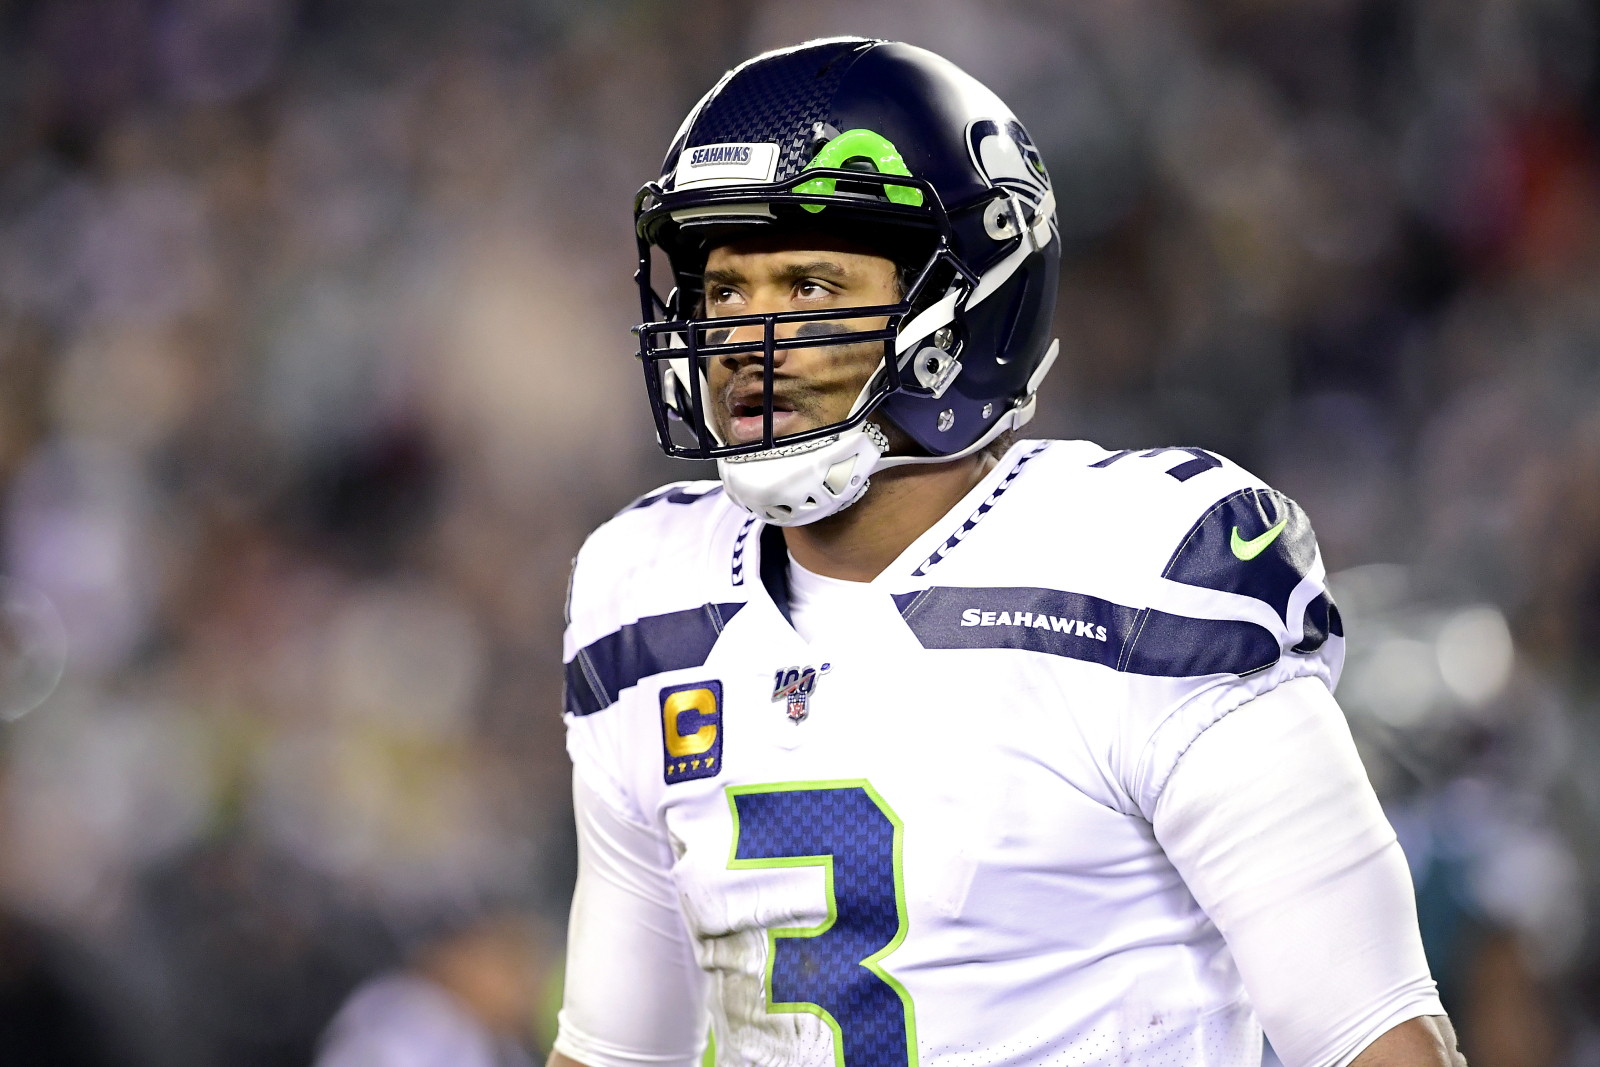 Russell Wilson is the Seattle Seahawks' franchise quarterback. However, could he end up leaving Seattle if his demand isn't met?